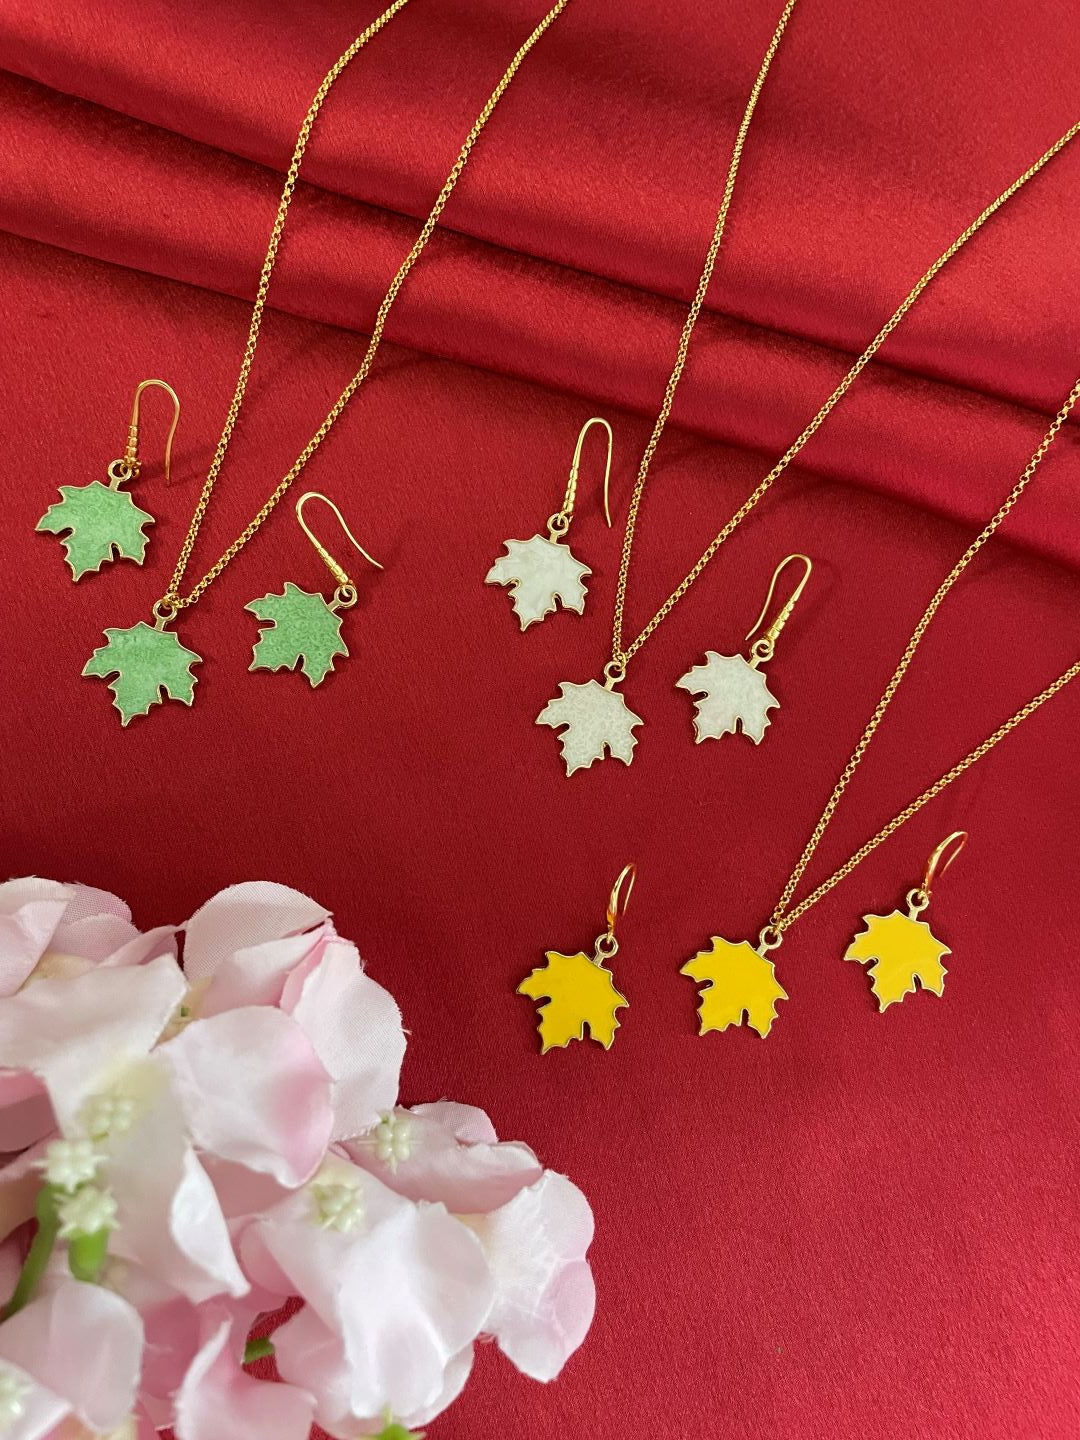 Gold Dipped Leaf Jewelry | Real Maple Leaf Necklace